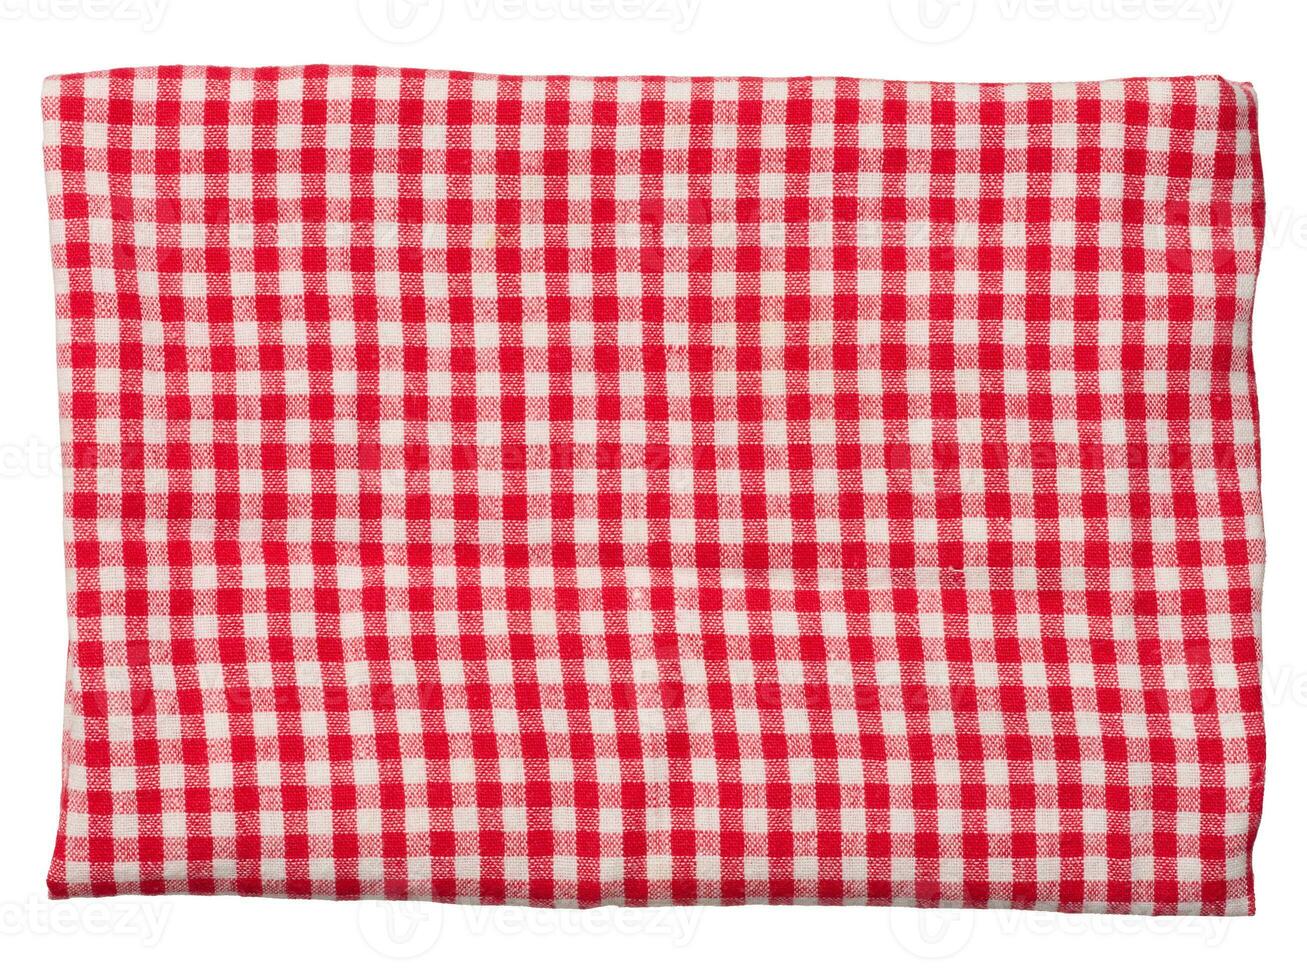 Cotton red-white kitchen towel, close up photo